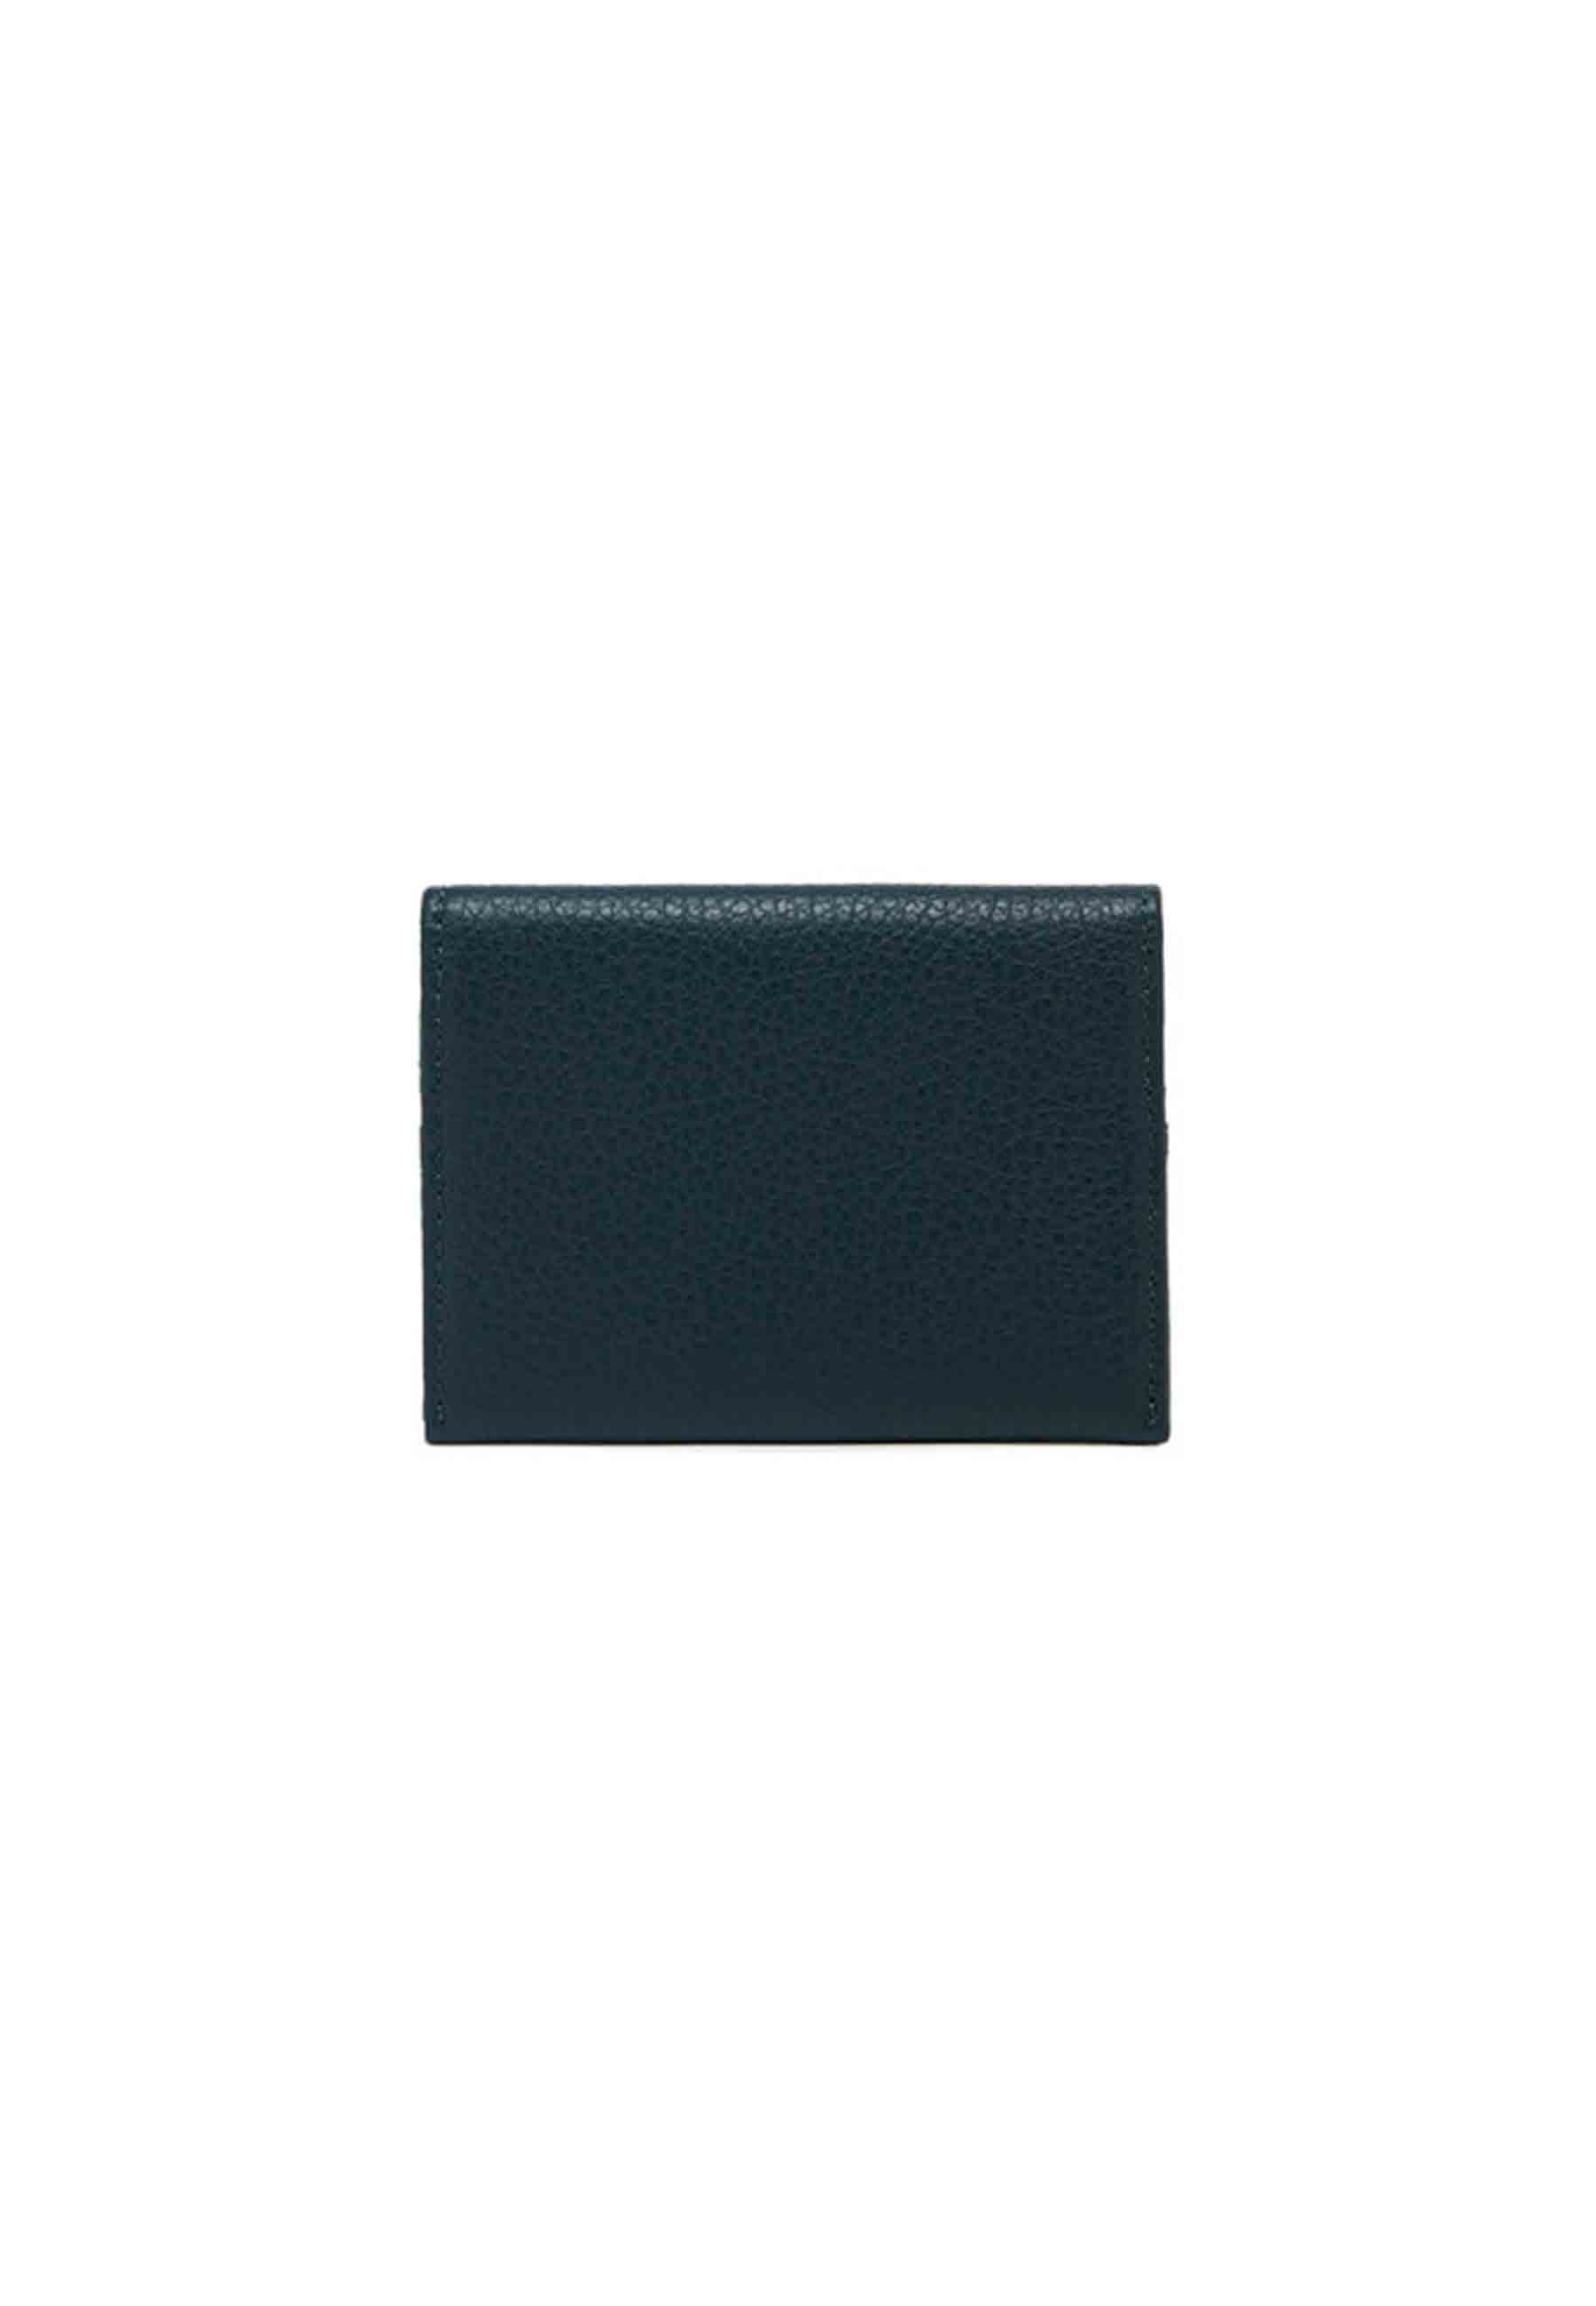 Women's card holder in green grained leather with button closure